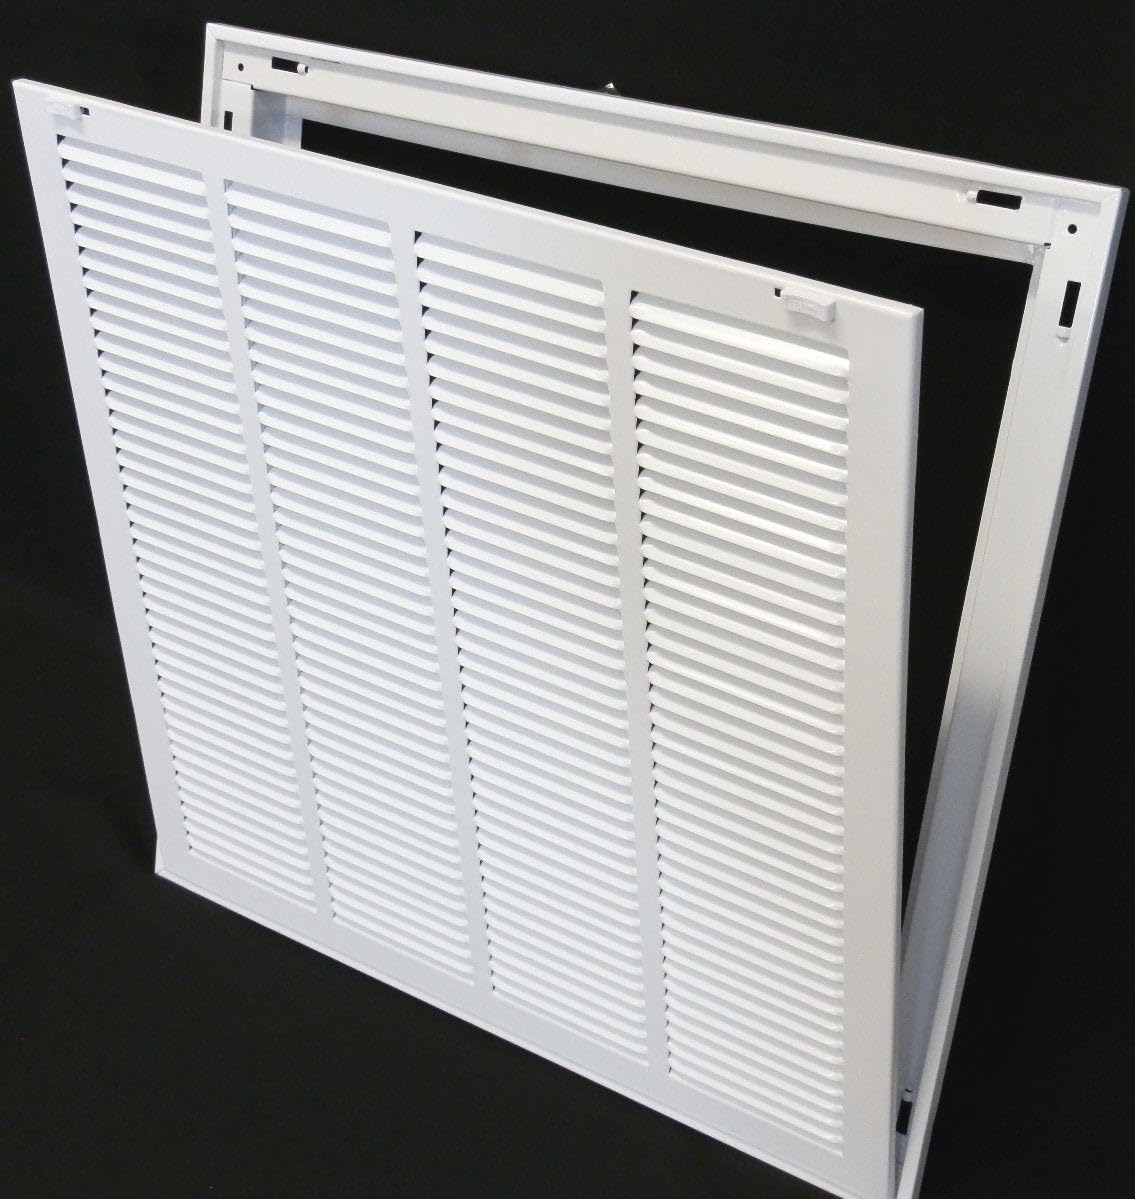 24&quot; X 10&quot; Steel Return Air Filter Grille for 1&quot; Filter - Removable Frame - [Outer Dimensions: 26 5/8&quot; X 12 5/8&quot;]